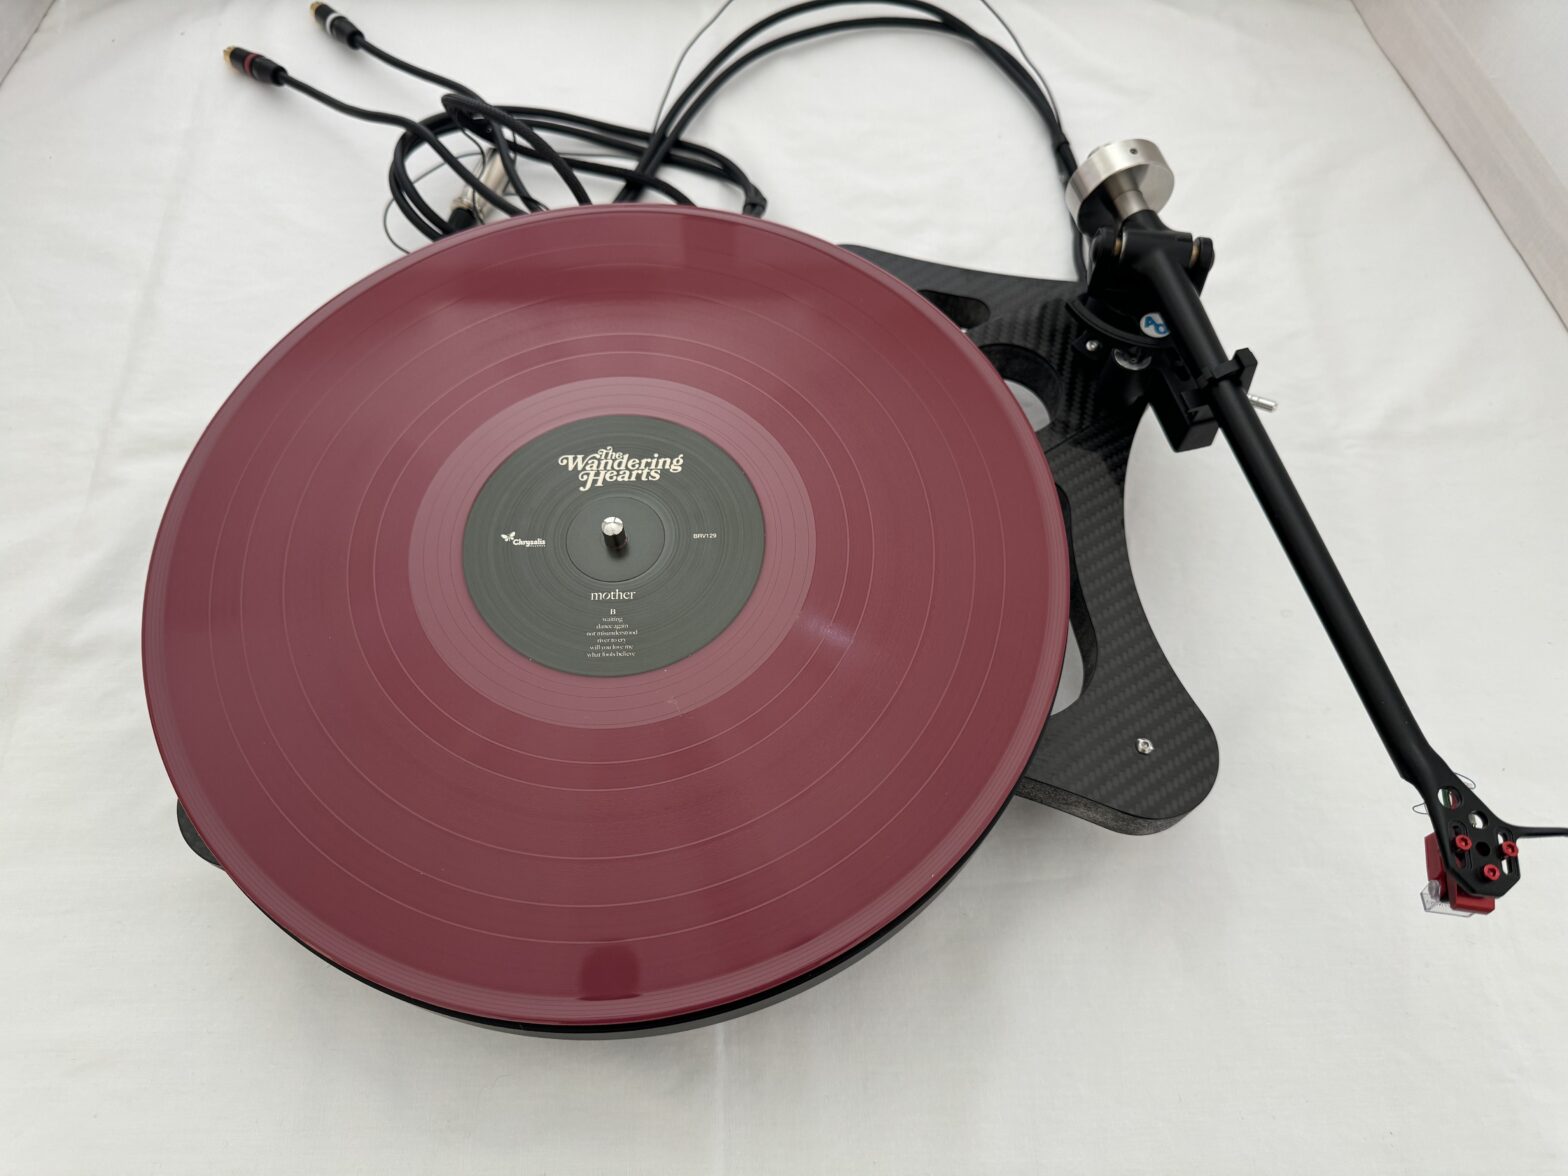 Project Leoht – Ultra Low Mass Turntable